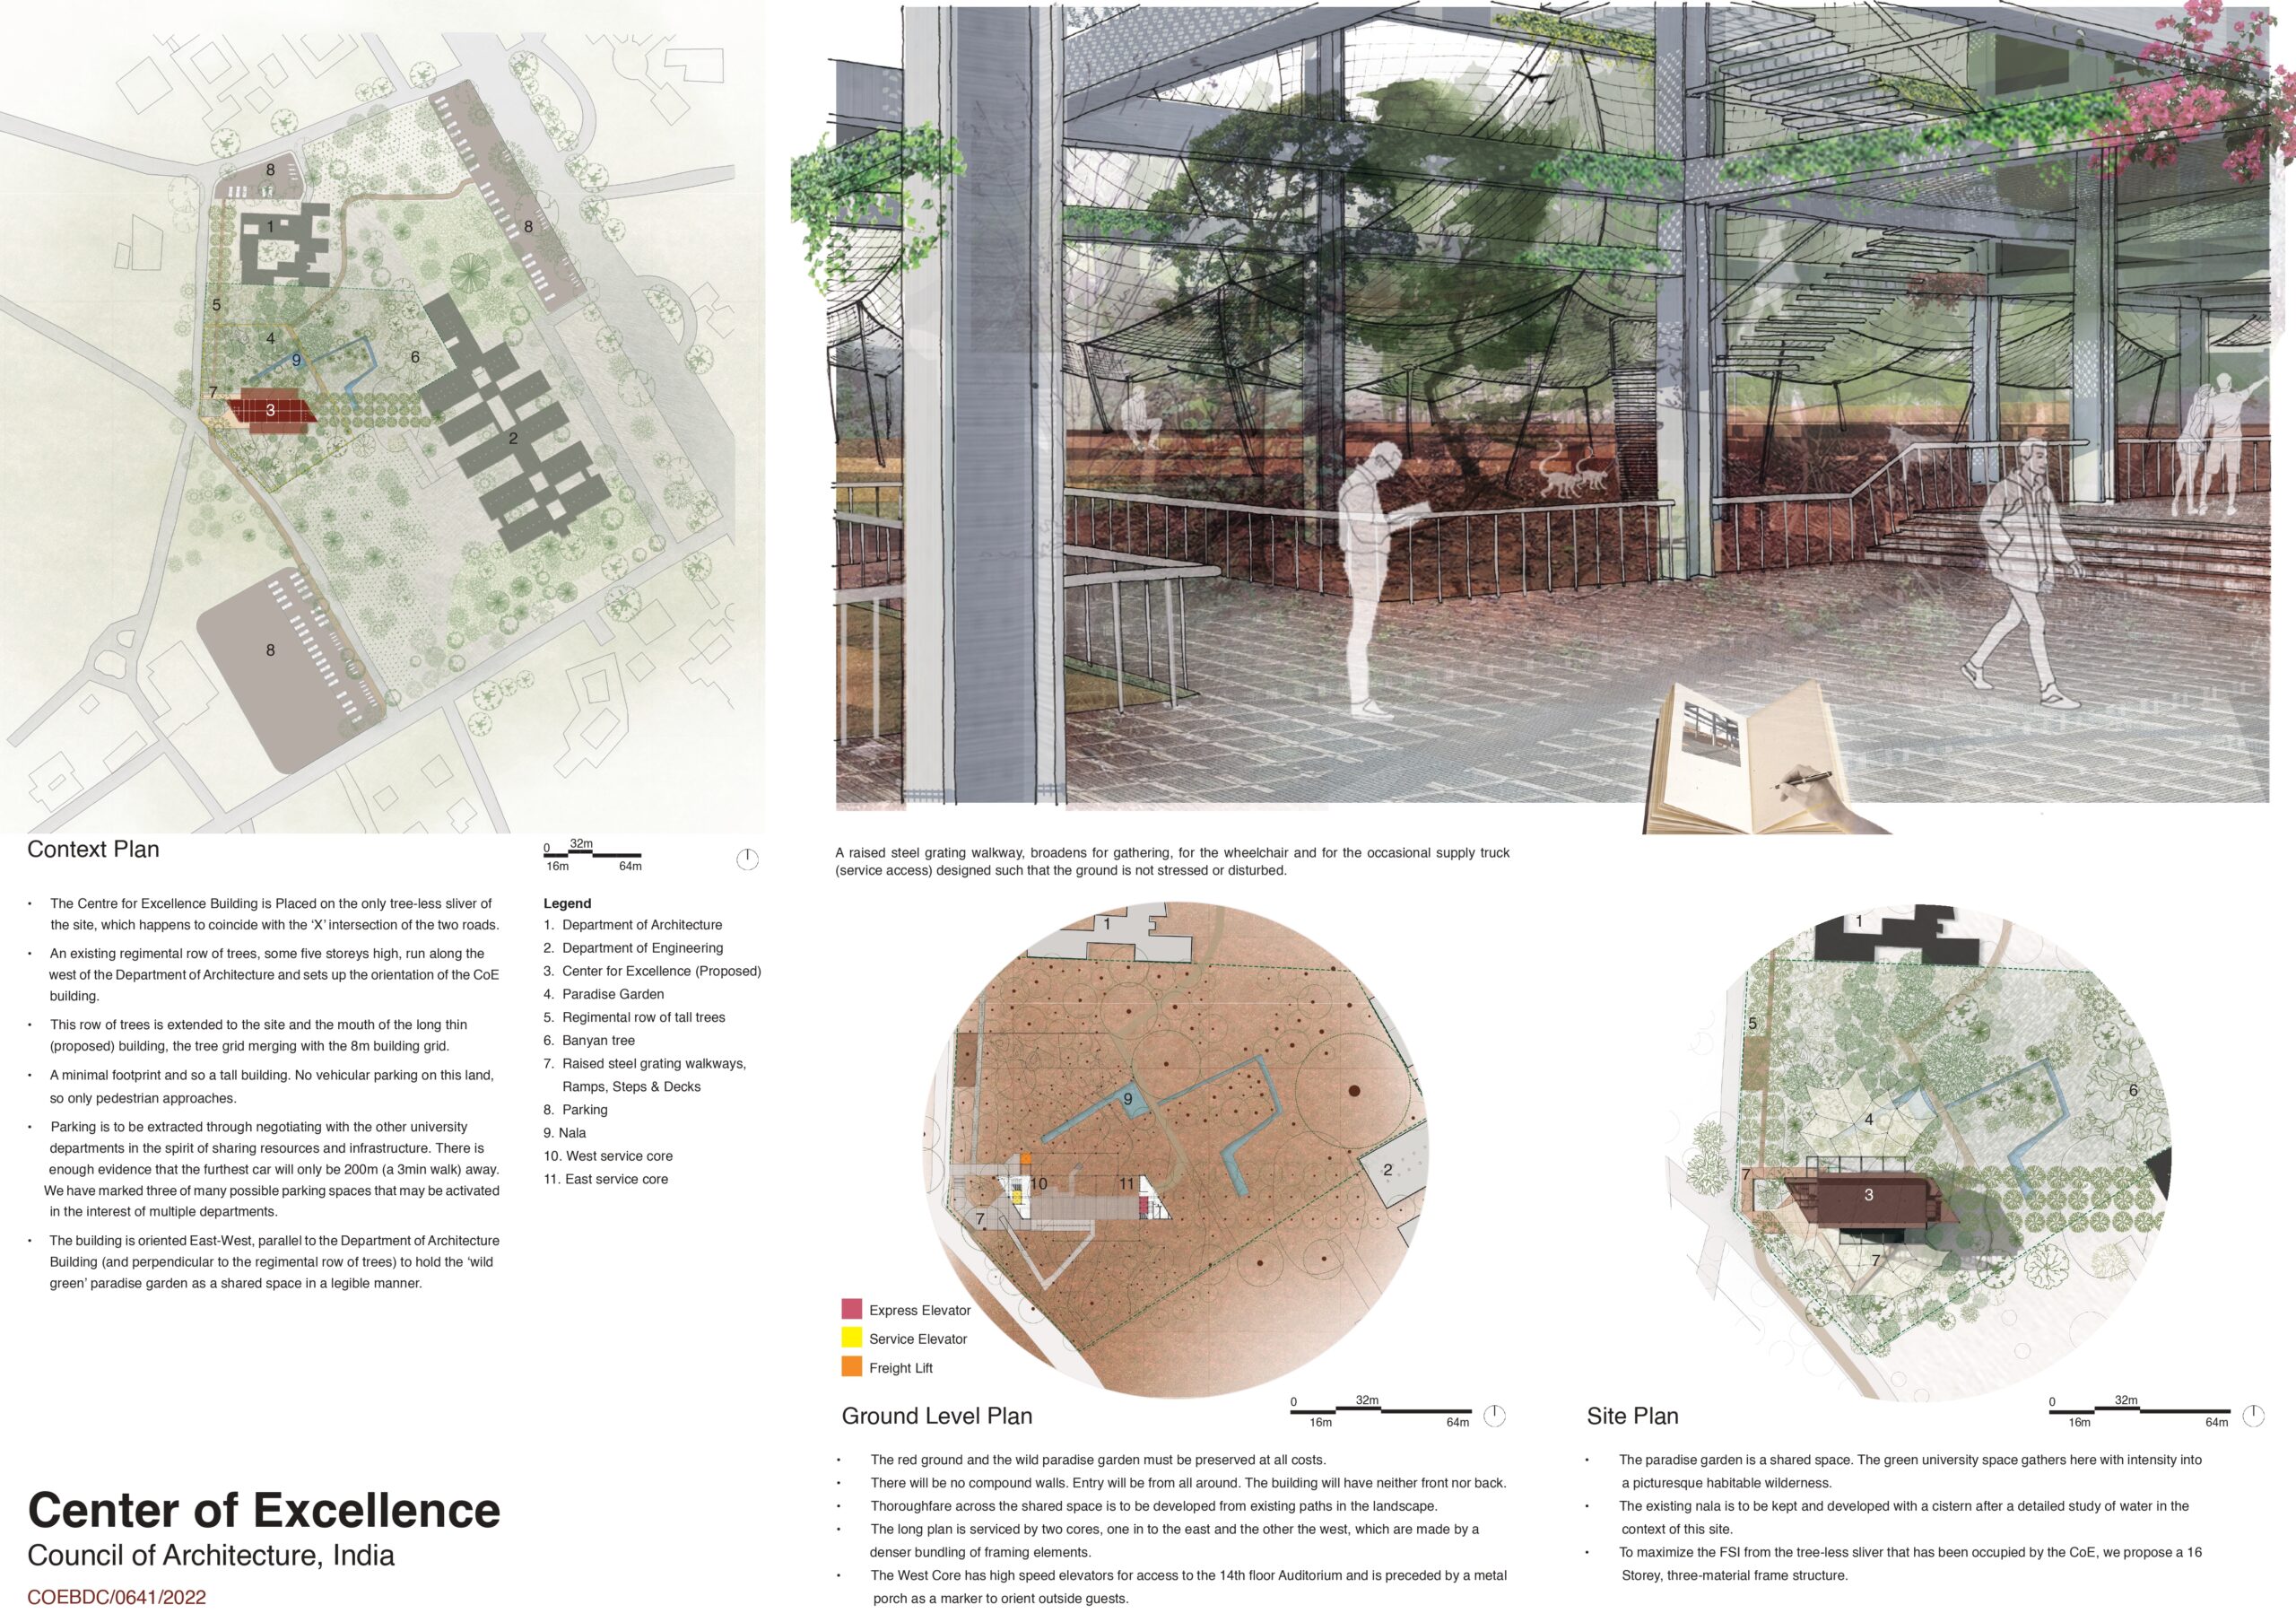 Centre of Excellence, Bengaluru, Competition Entry by Anthill Design | Council of Architecture, India 71